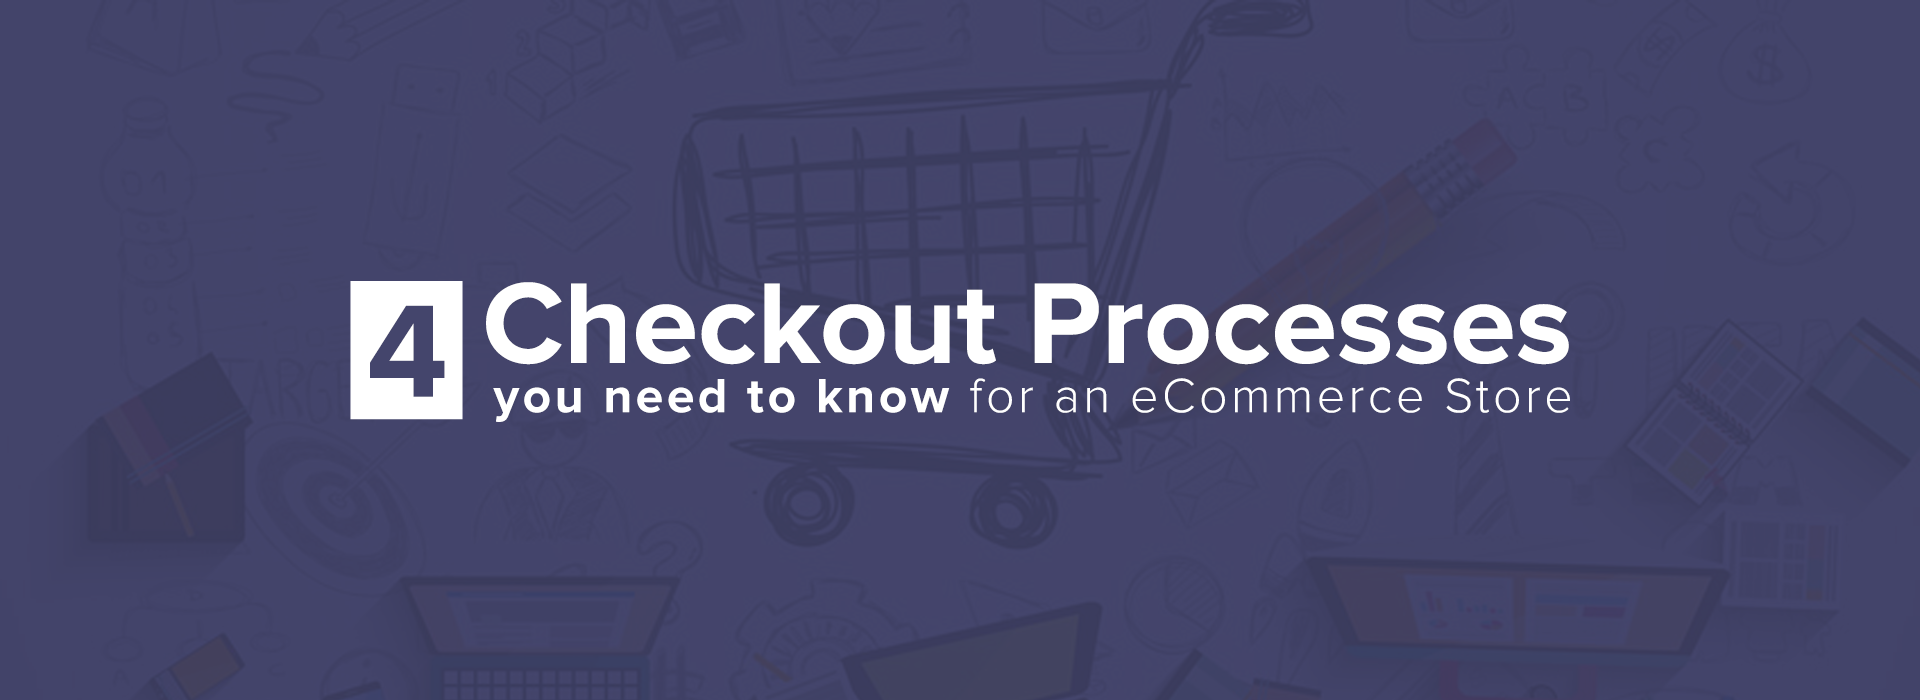 4-Checkout-Processes-you-need-to-know-for-an-eCommerce-Store